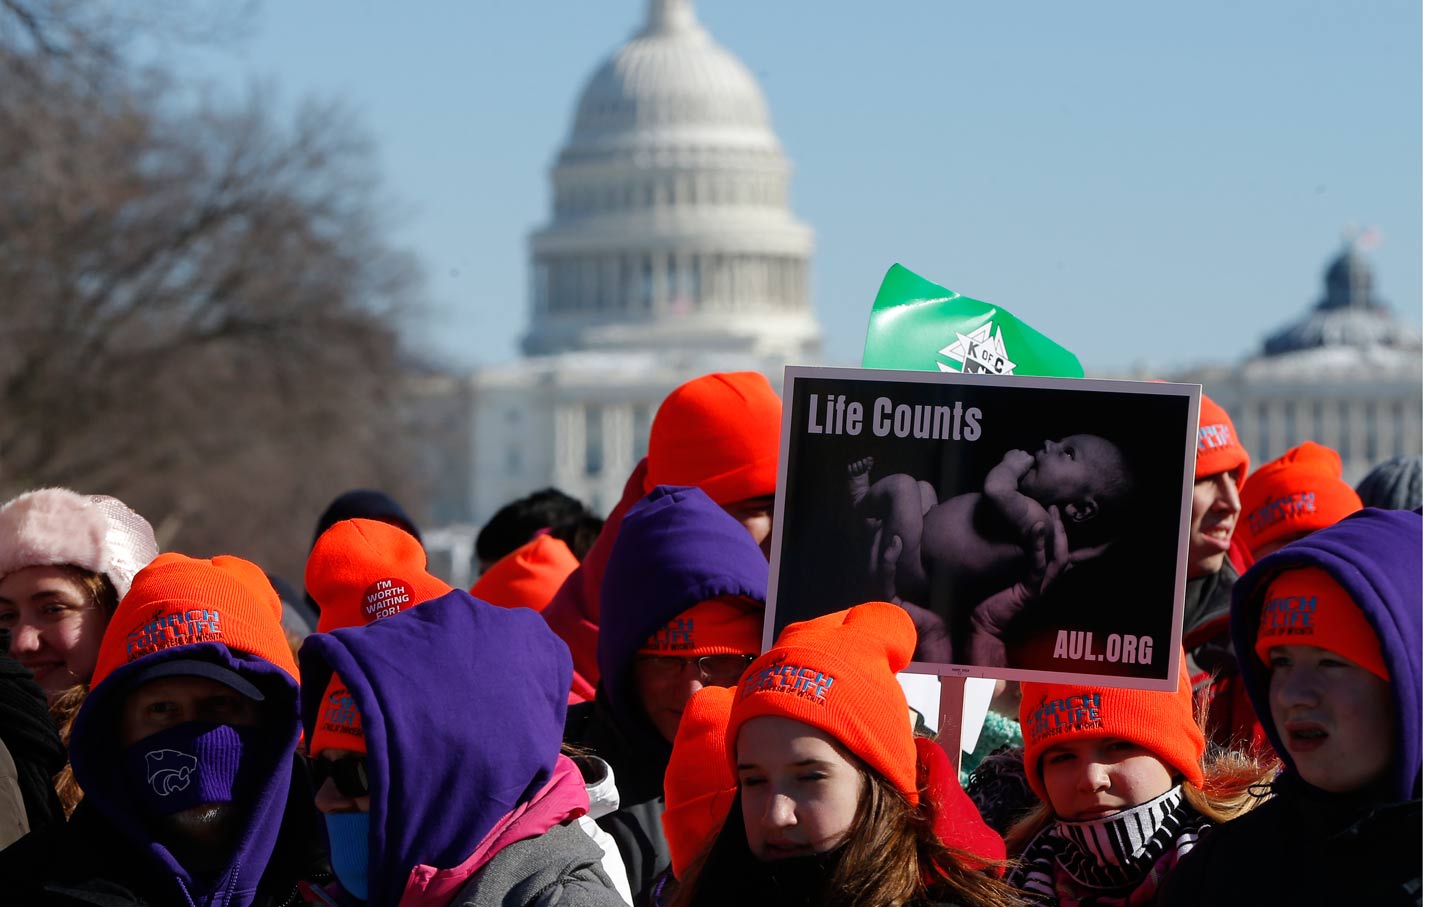 Should Anti-Abortion Activists Be Allowed to Harass Preschoolers?